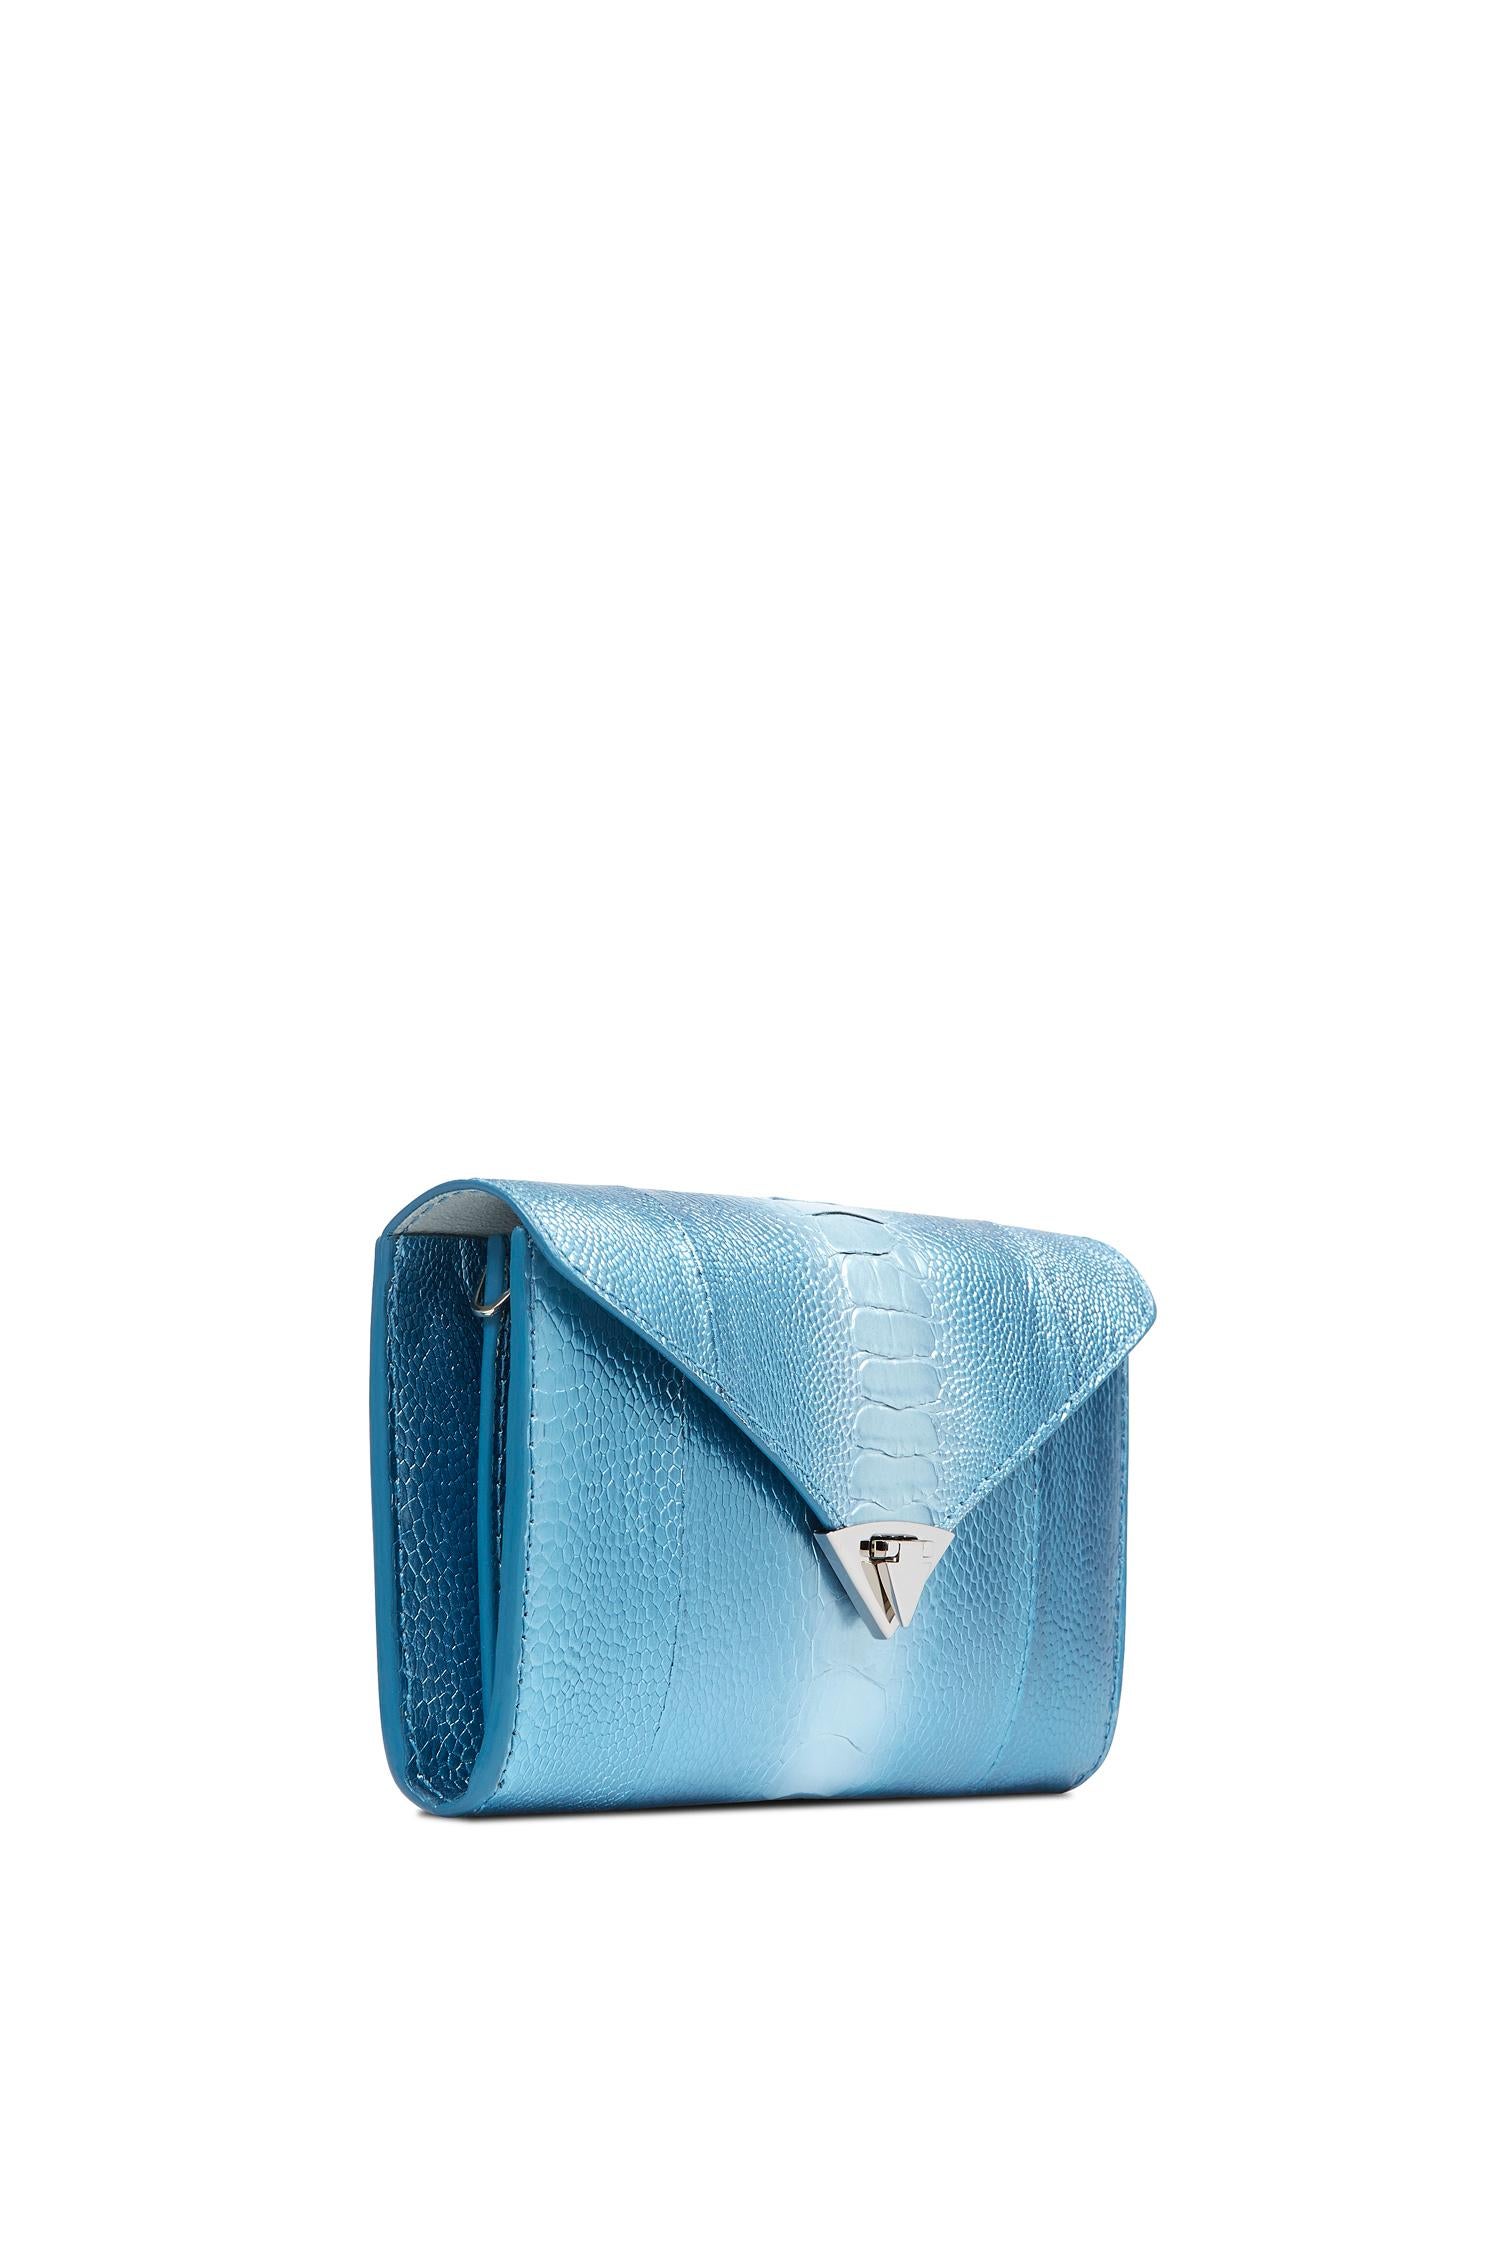 The Alex Wallet Blue Ice Ostrich Leg Silver Hardware is designed with a detachable silver cross-body chain, interior credit card slots and a pinecone pull zip pocket. It features our signature spear-lock closure and Thayer blue leather